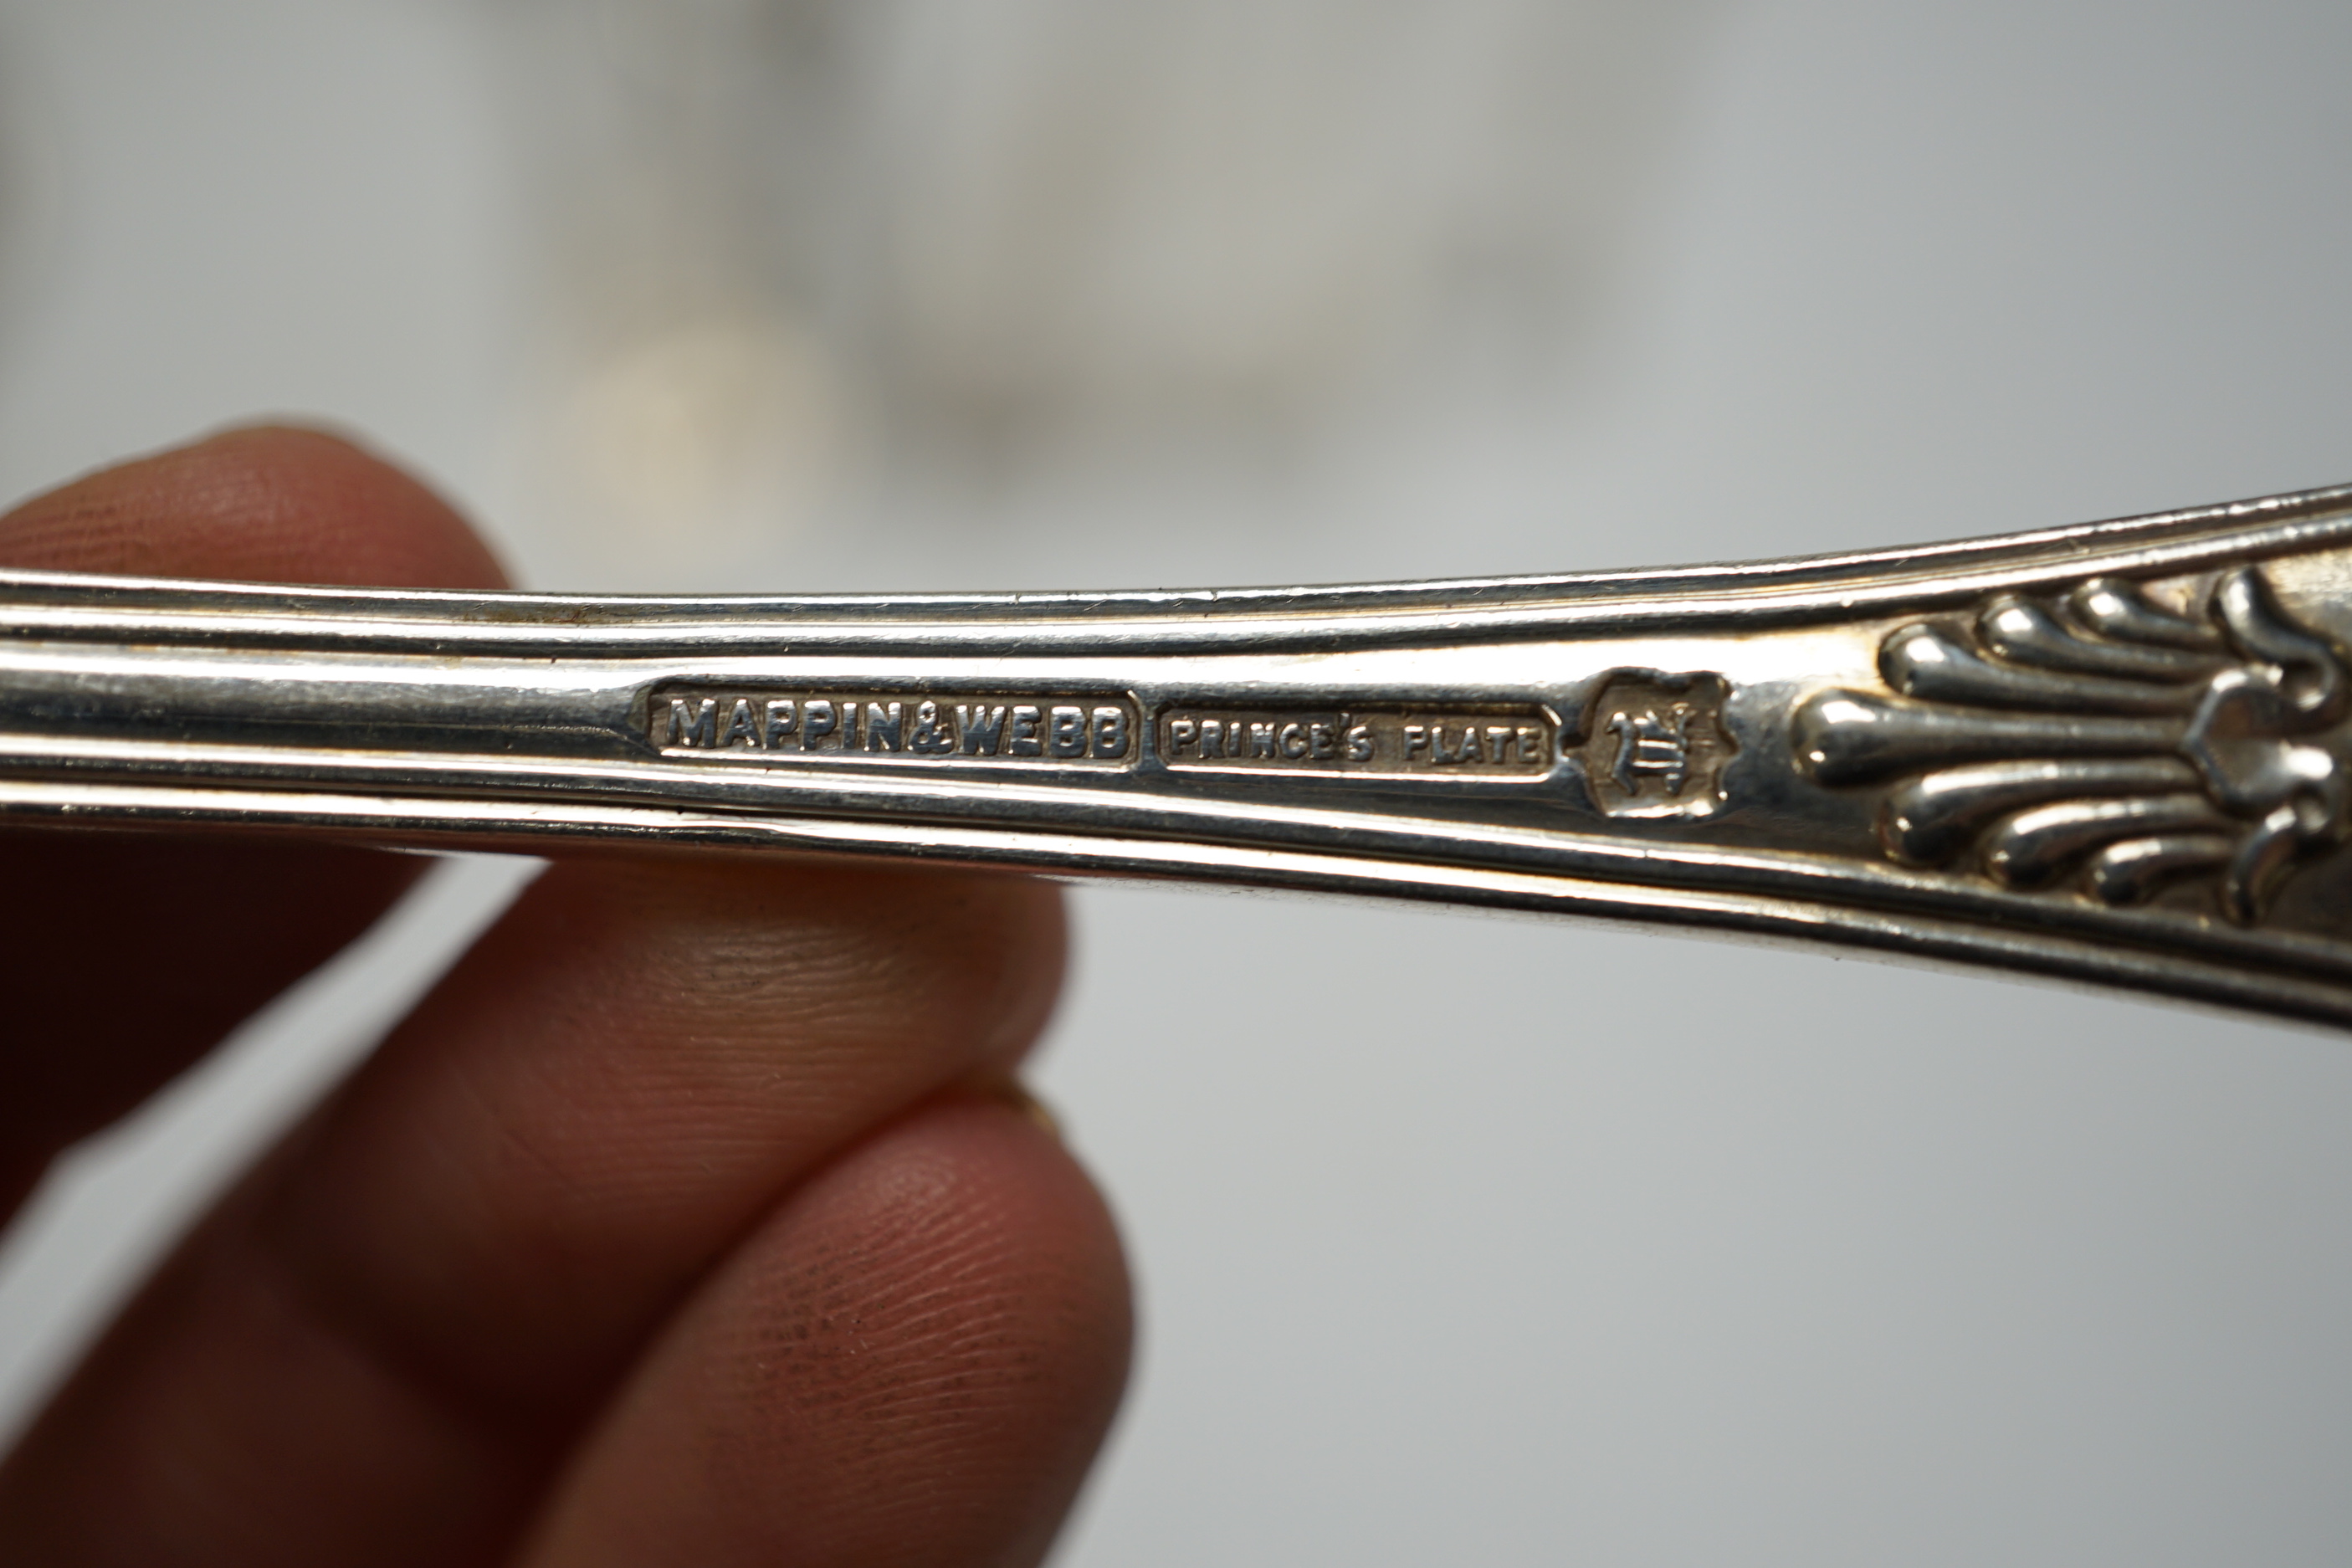 A silver plated part canteen of Kings pattern flatware, a pair of white metal tongs etc